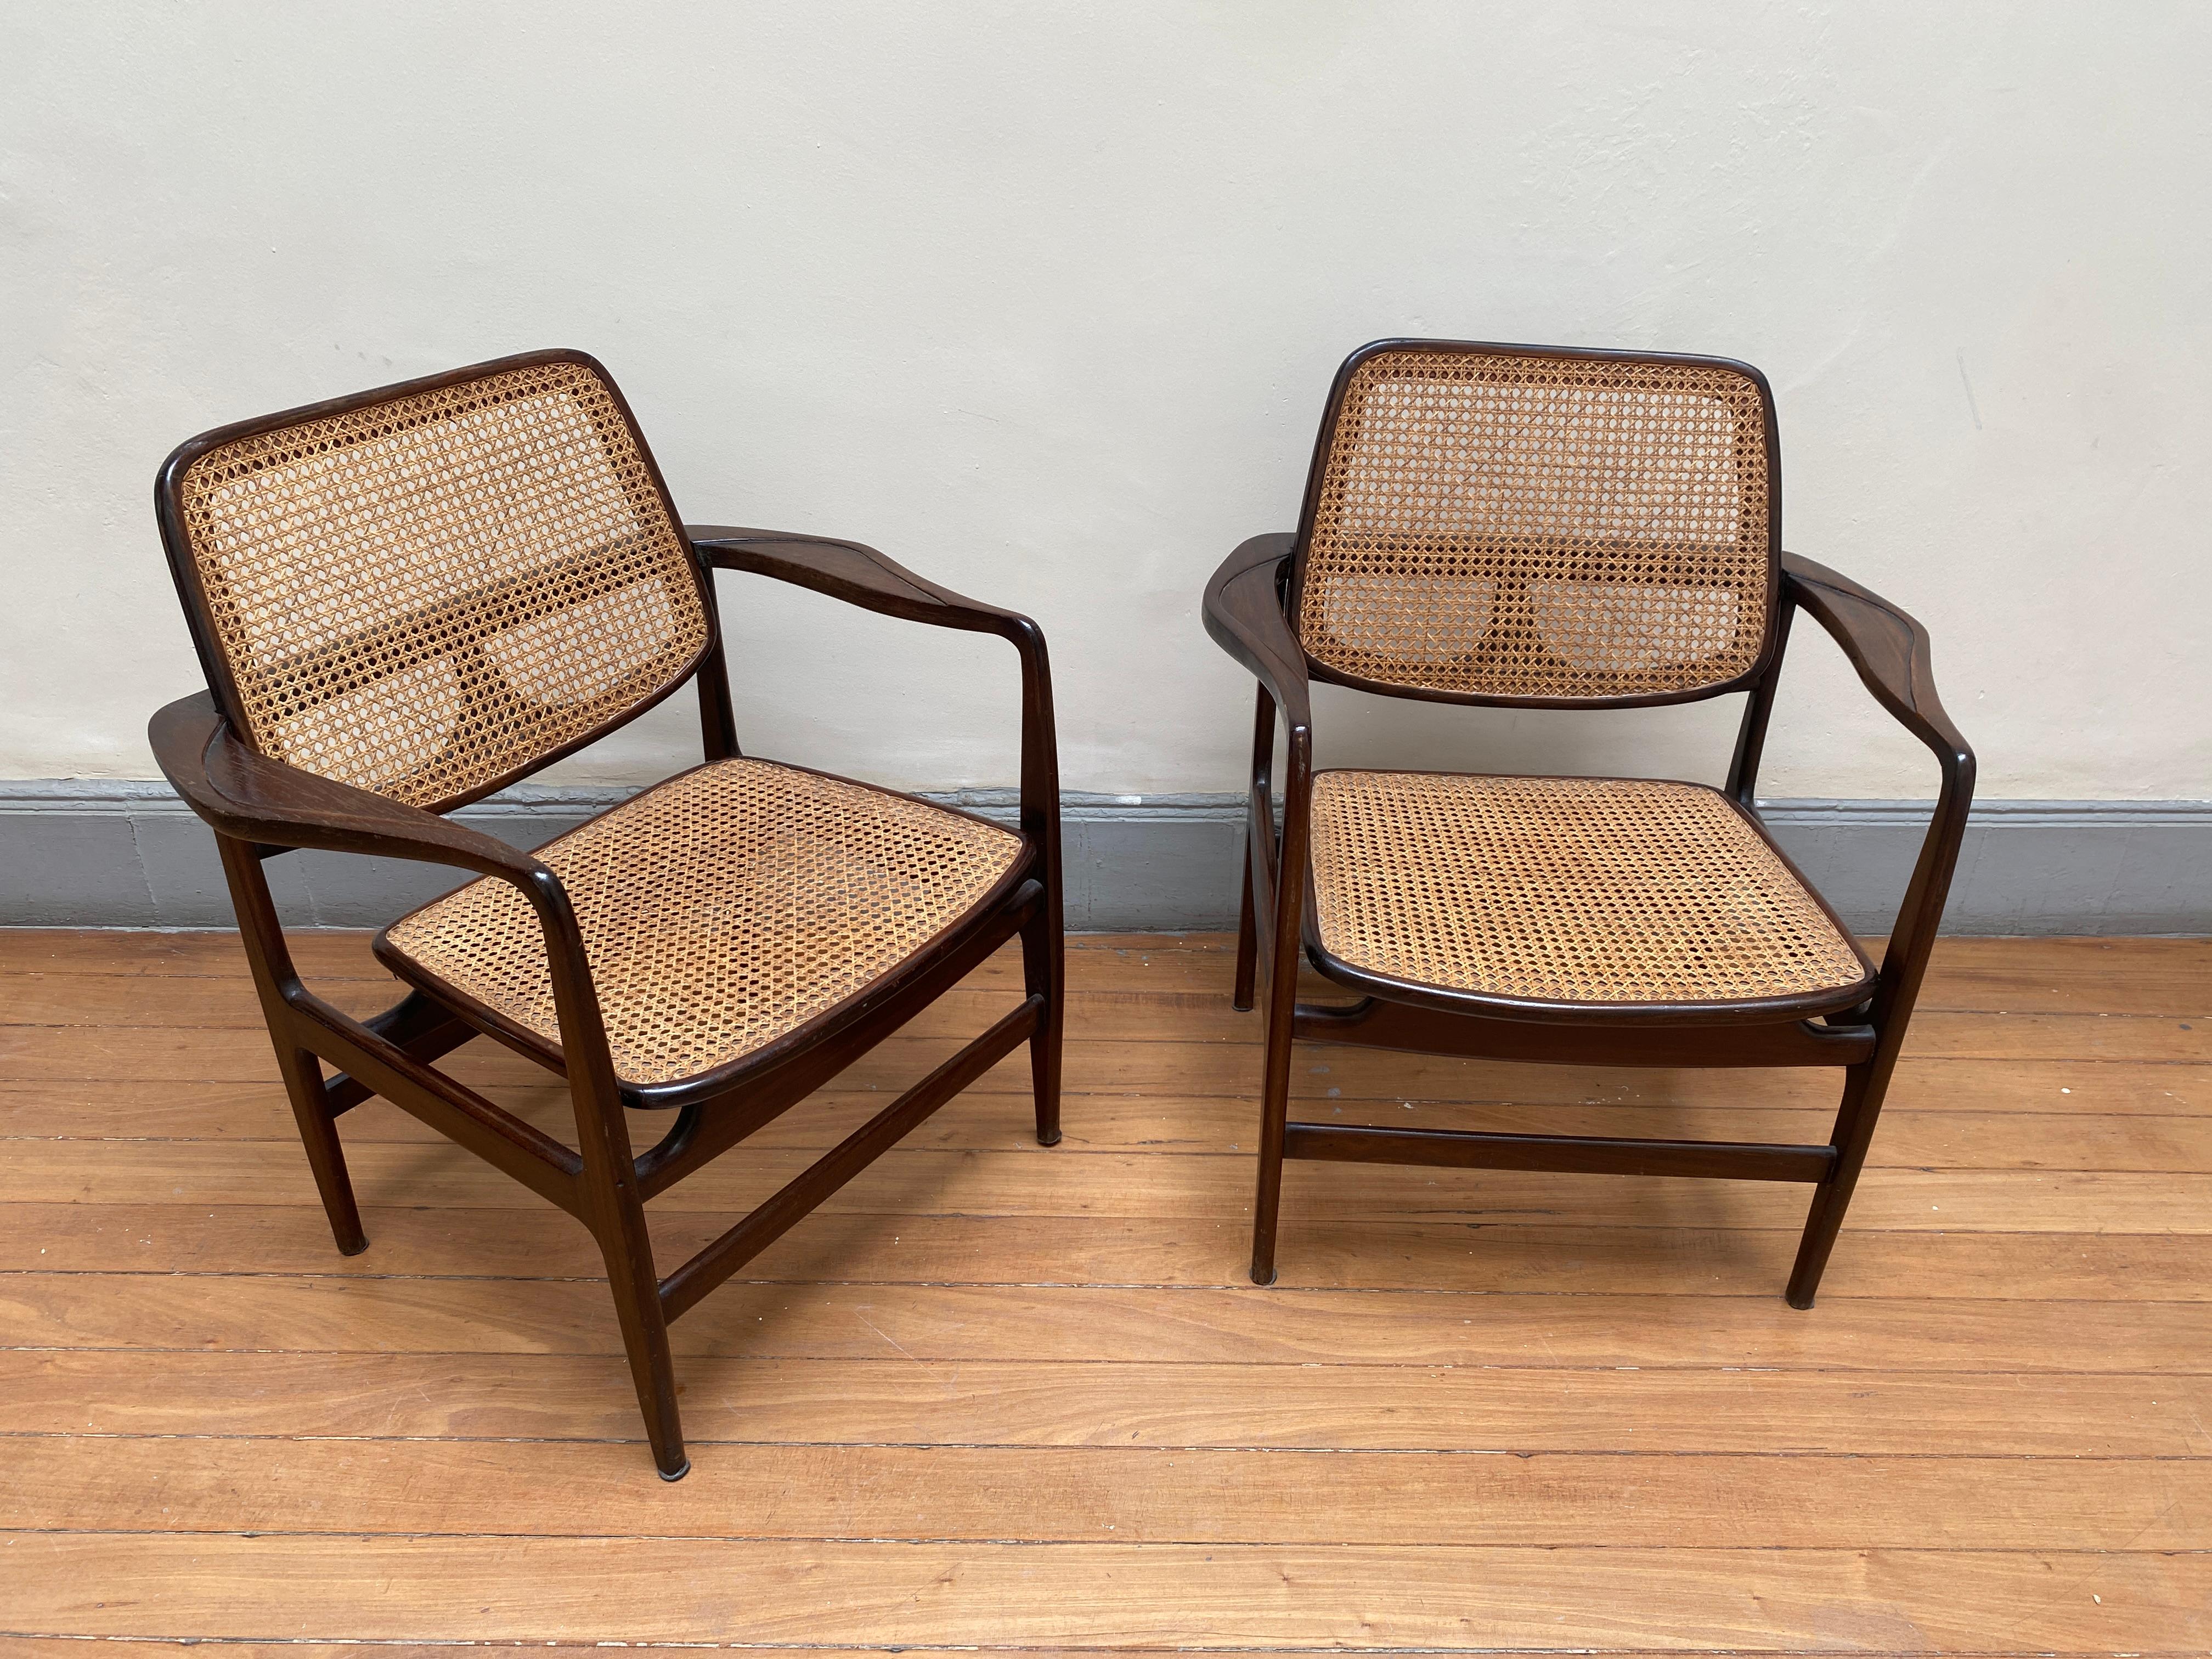 Set of Two Mid-Century Modern Oscar Armchairs by Sergio Rodrigues, Brazil, 1956

Named after Oscar Niemeyer, this armchair features the iconic curves and sinuous lines characteristic of the work of the famous Brazilian architect. 
Designed in 1956